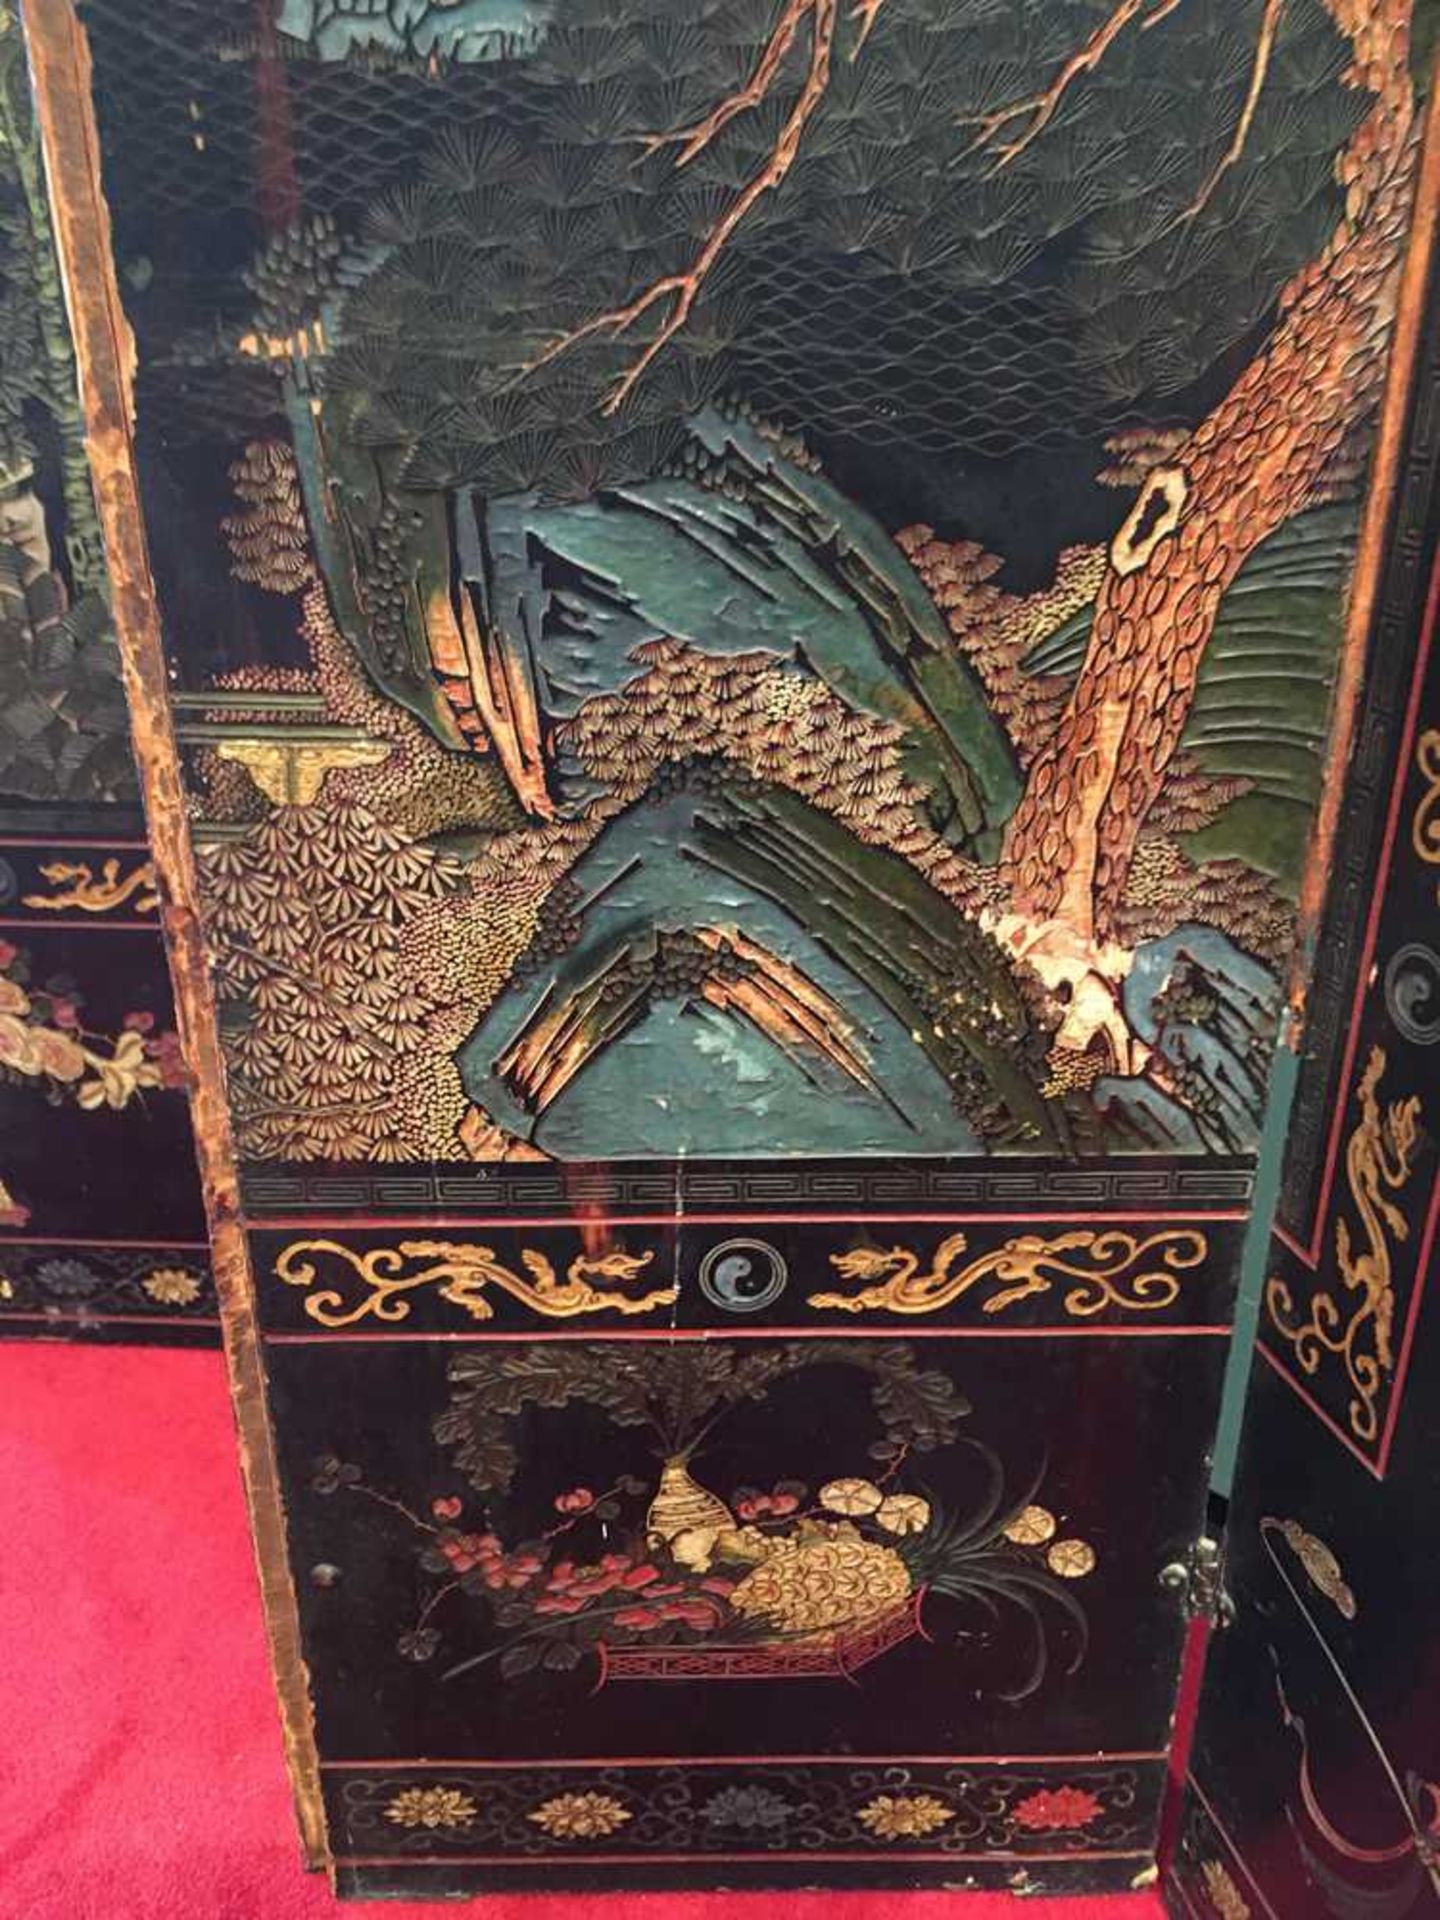 A CHINESE COROMANDEL BLACK LACQUER TWELVE-PANEL SCREEN QING DYNASTY, 18TH CENTURY - Image 47 of 72